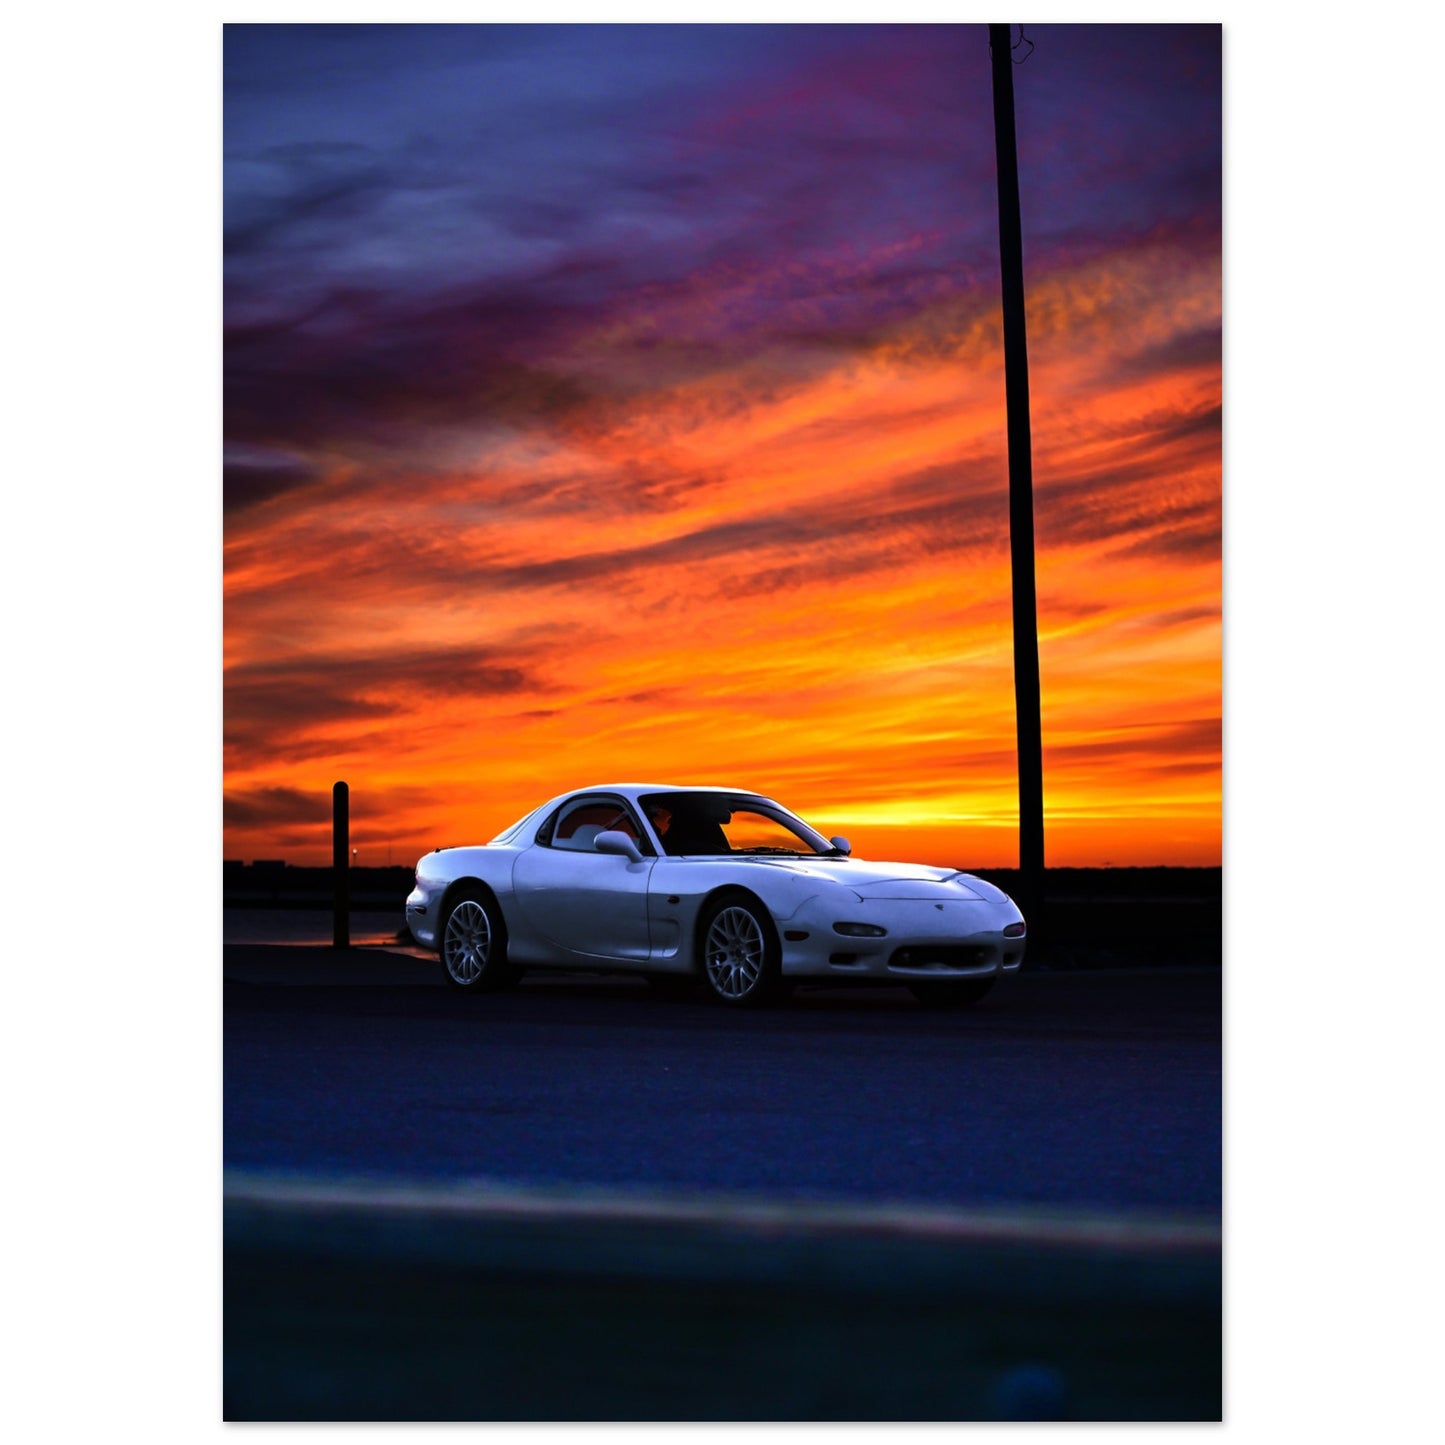 Sundown Elegance: Mazda RX7 Silhouetted in the Sunset